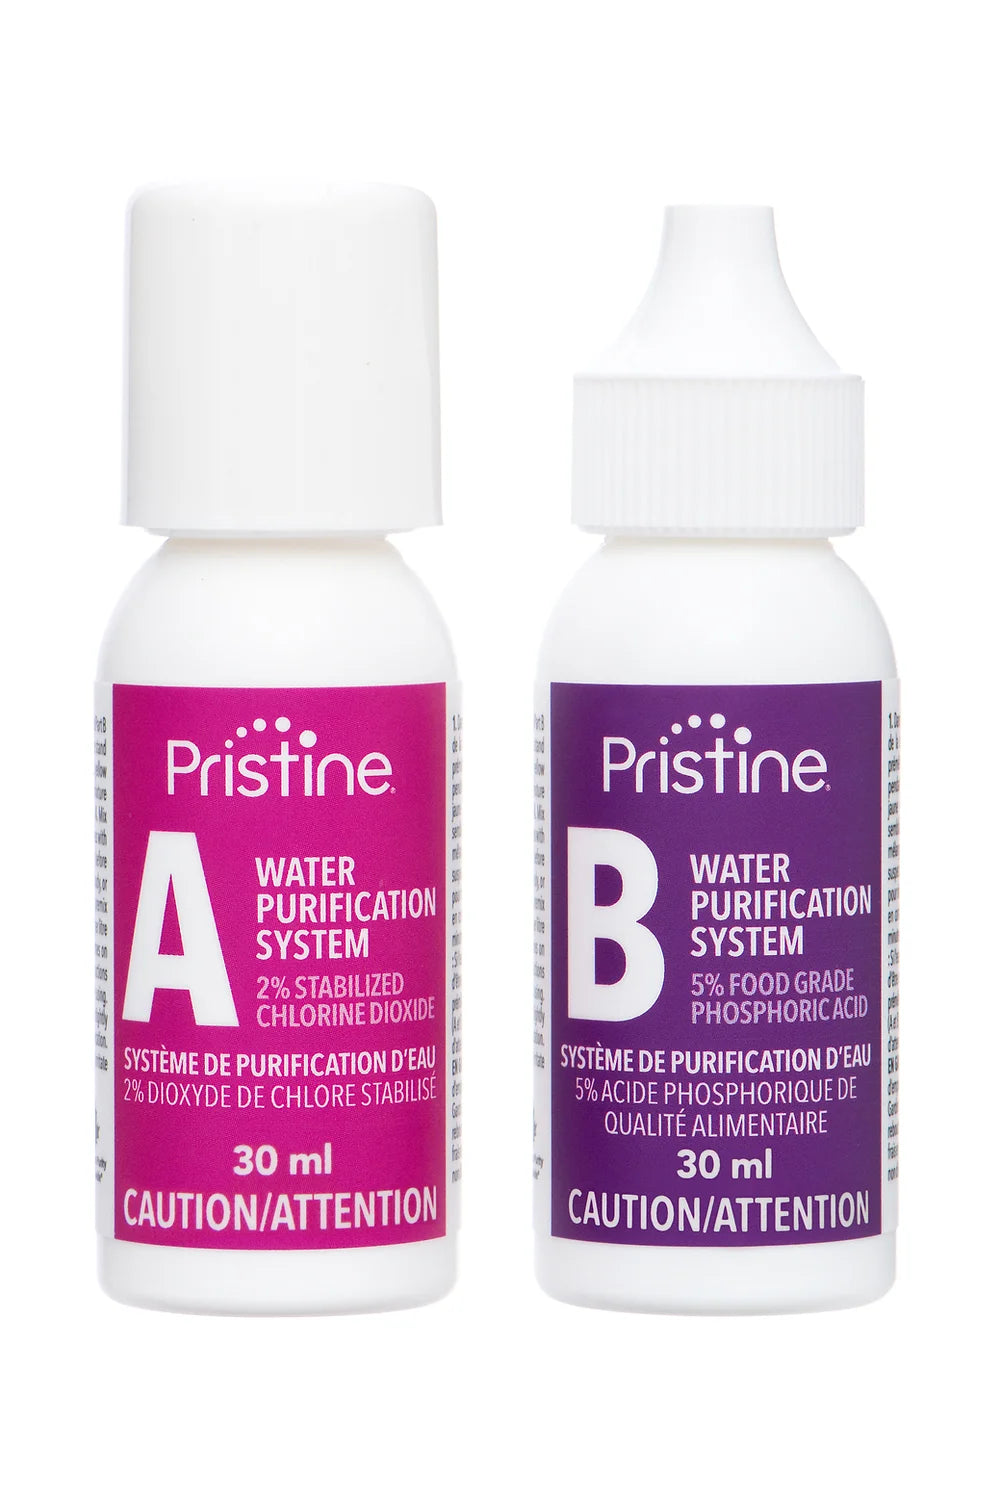 Pristine Water Purification System 30ml